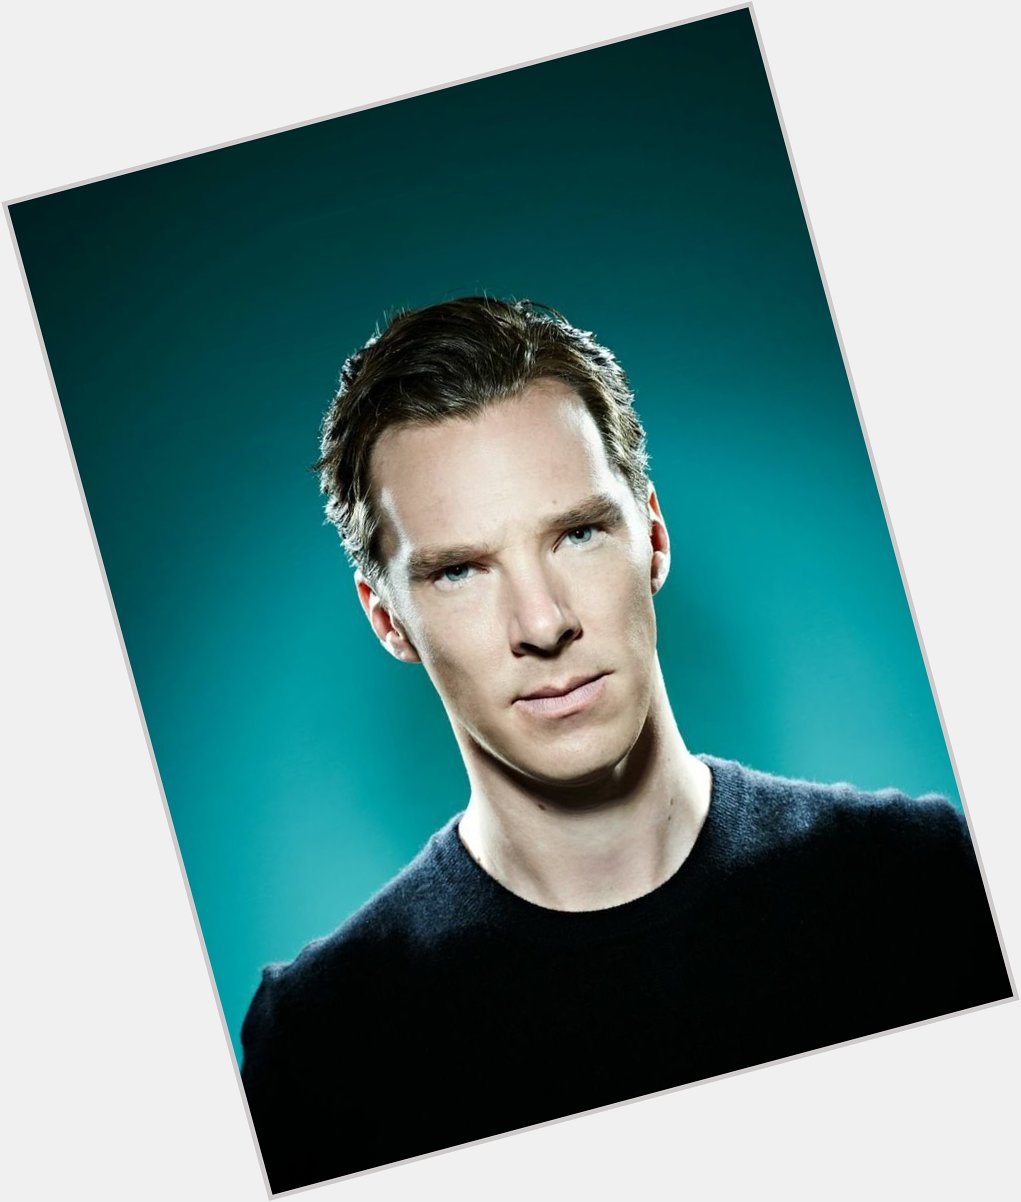 Happy Birthday from everyone at LAMDA to our President, Benedict Cumberbatch. 